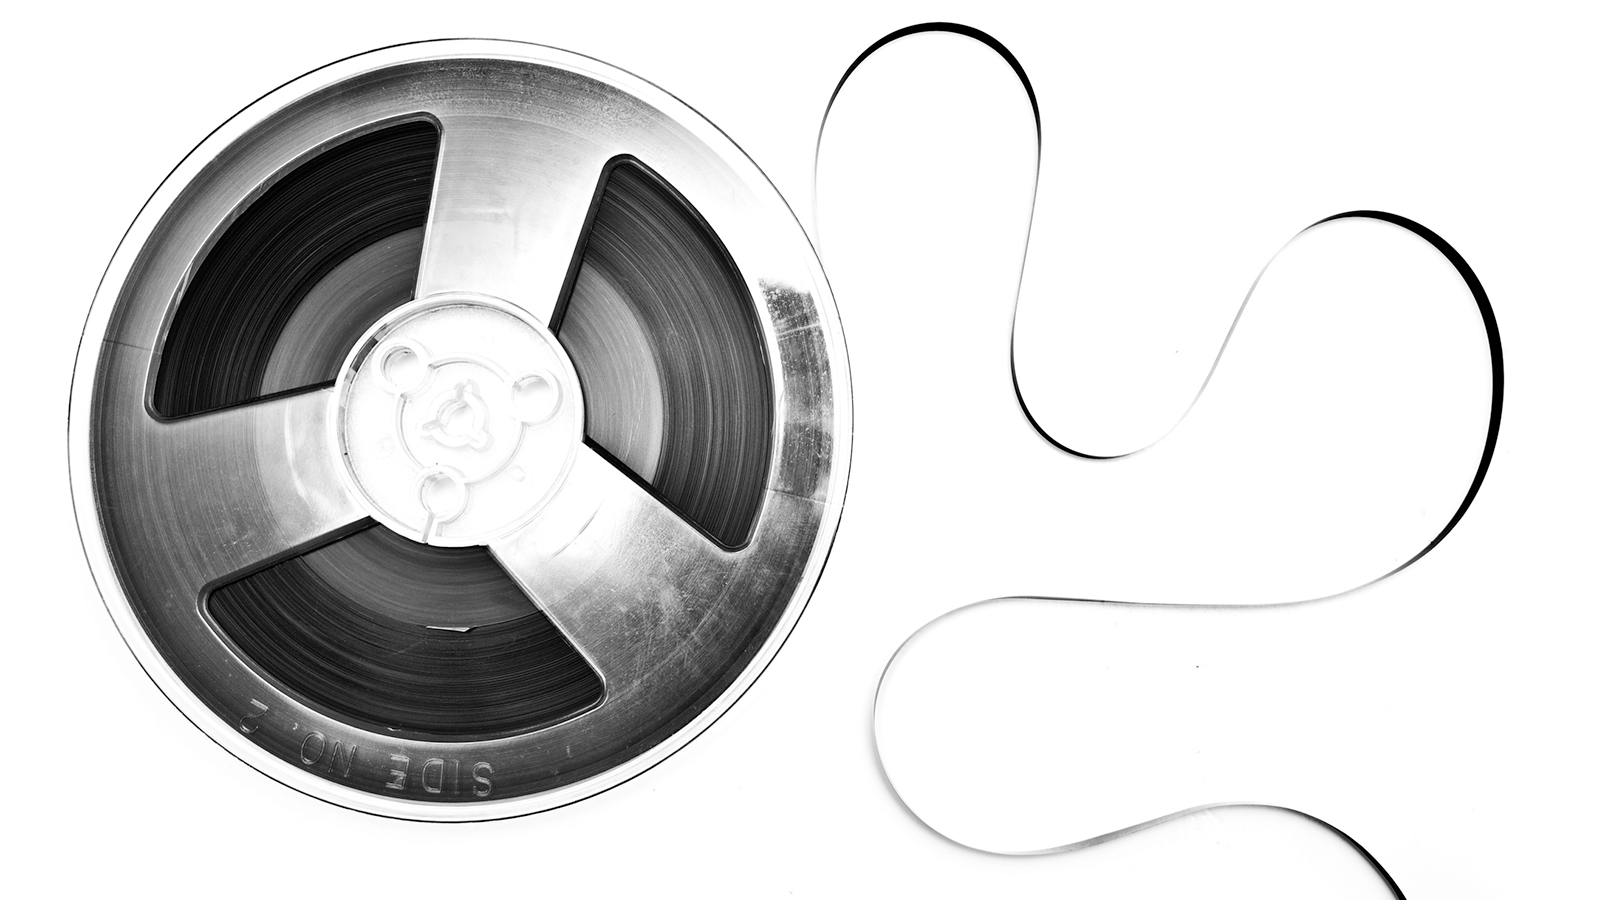 How can we rescue music stored on degraded magnetic tapes? Researchers find a way